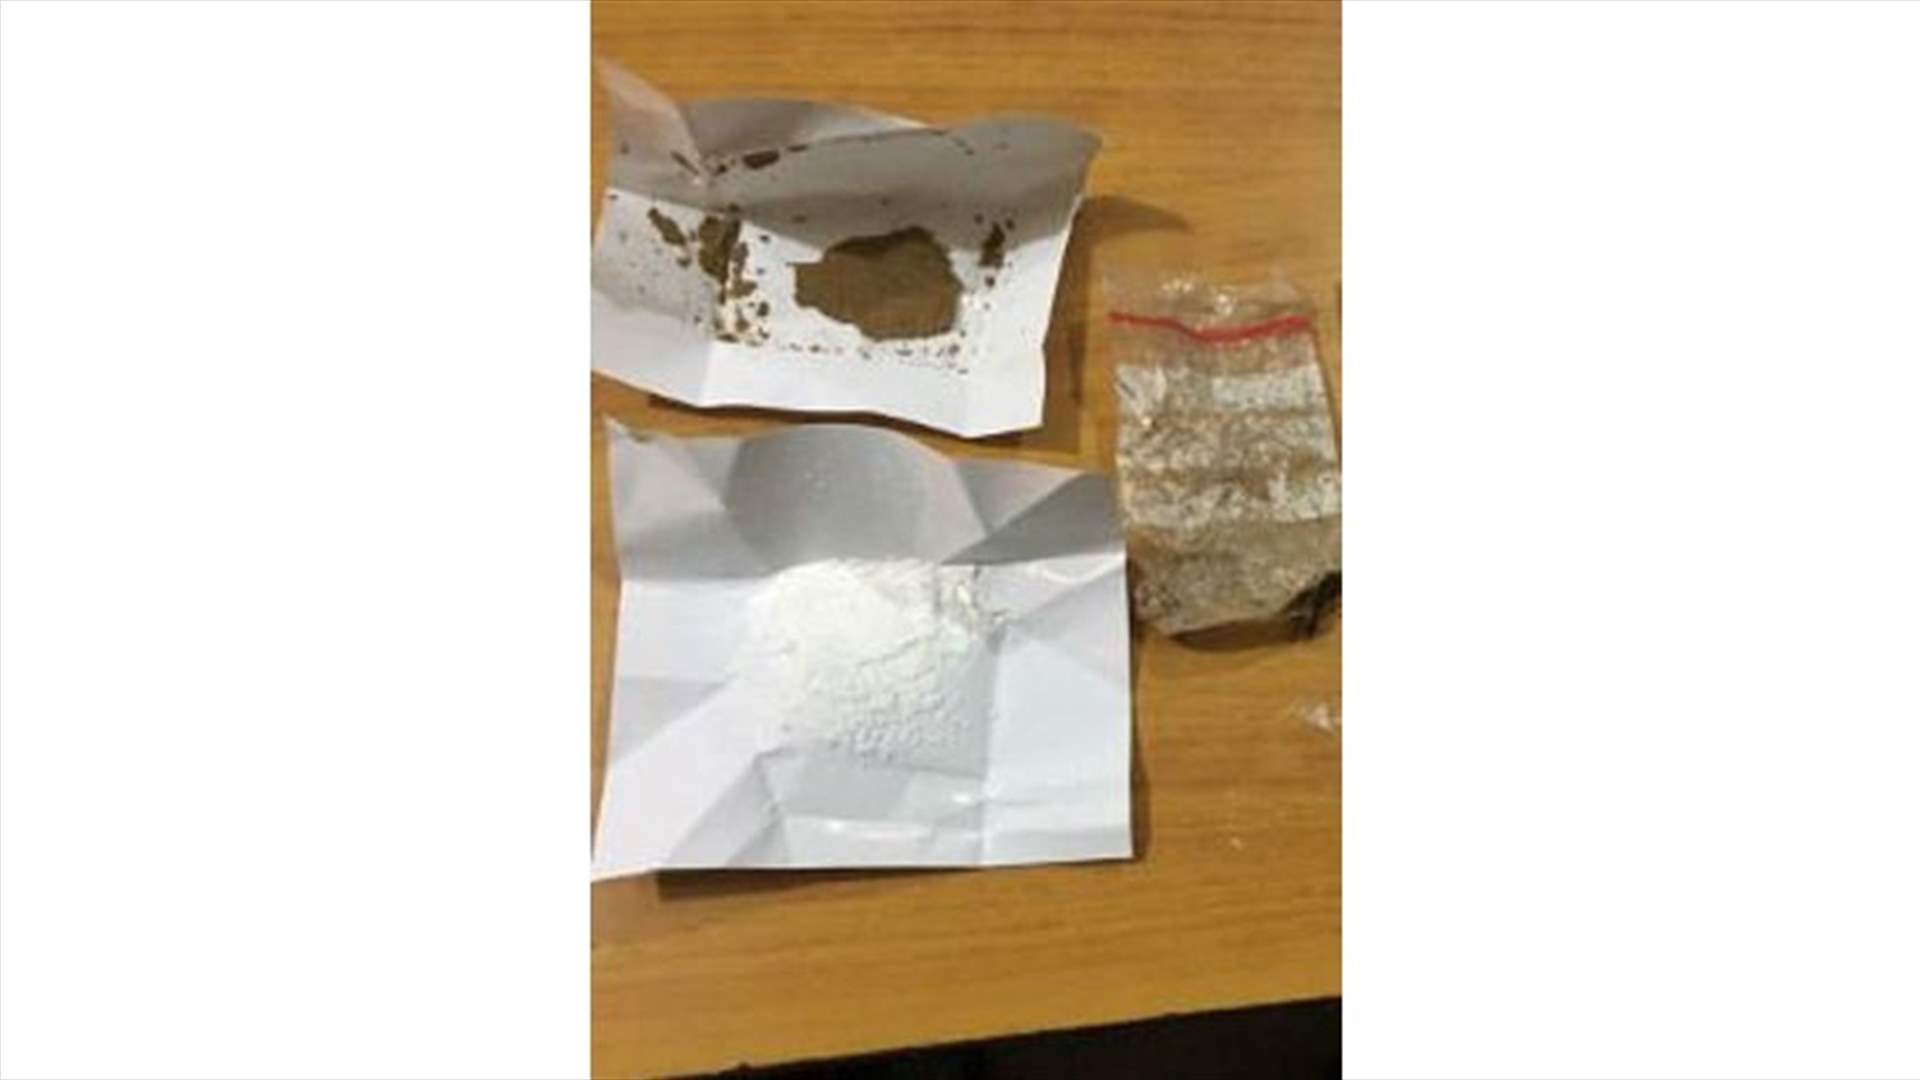 Four persons arrested in Daher al-Baydar for possession of drugs